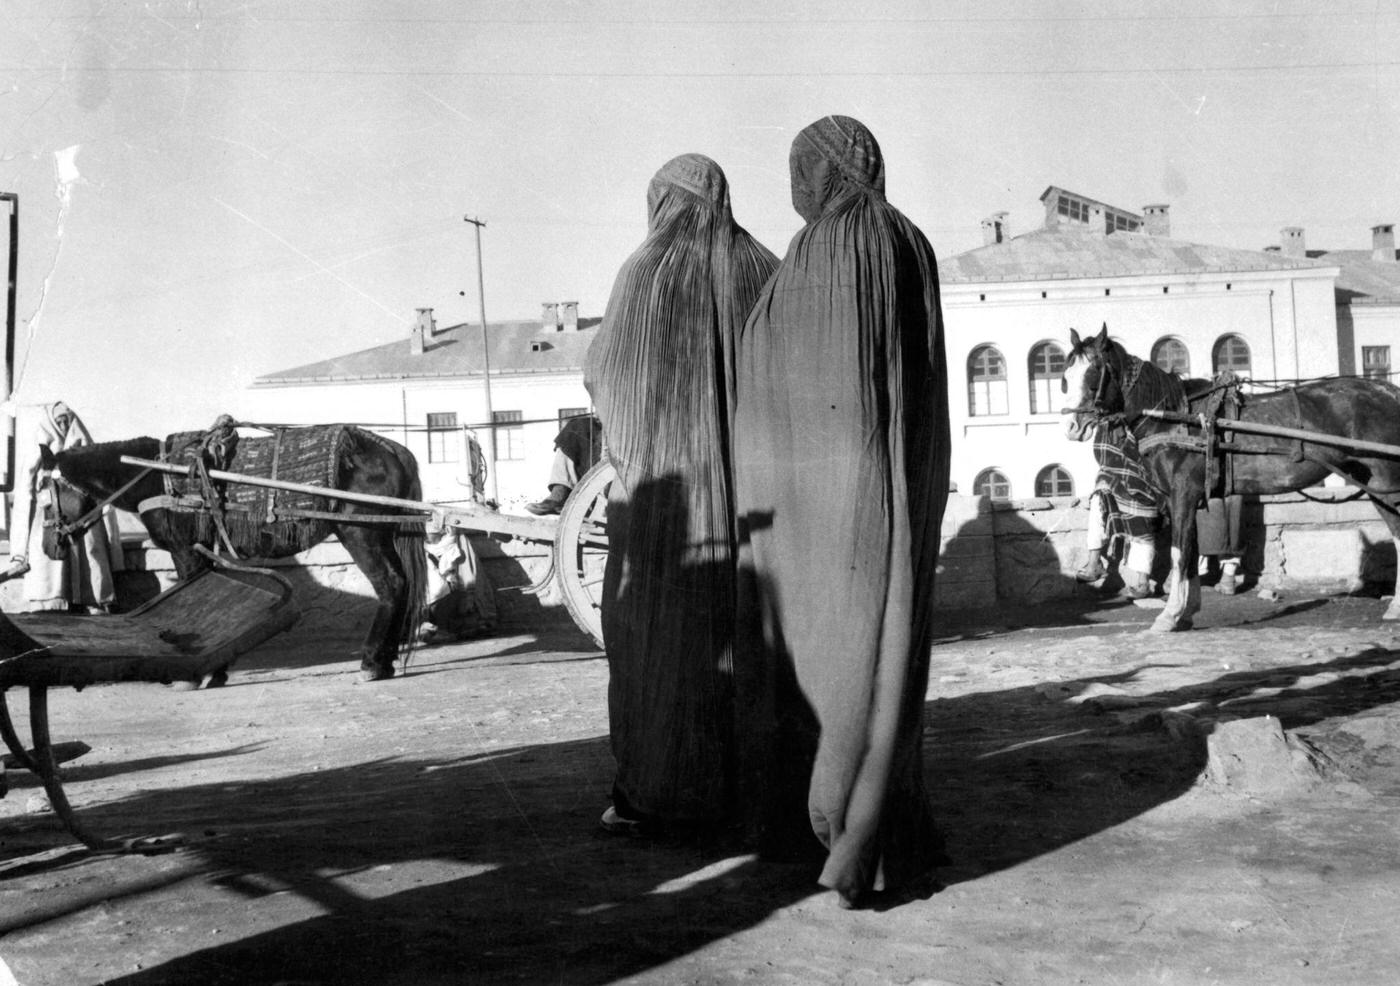 Women in veils waiting for a "taxi" ponycart in a Kabul street, 1955.